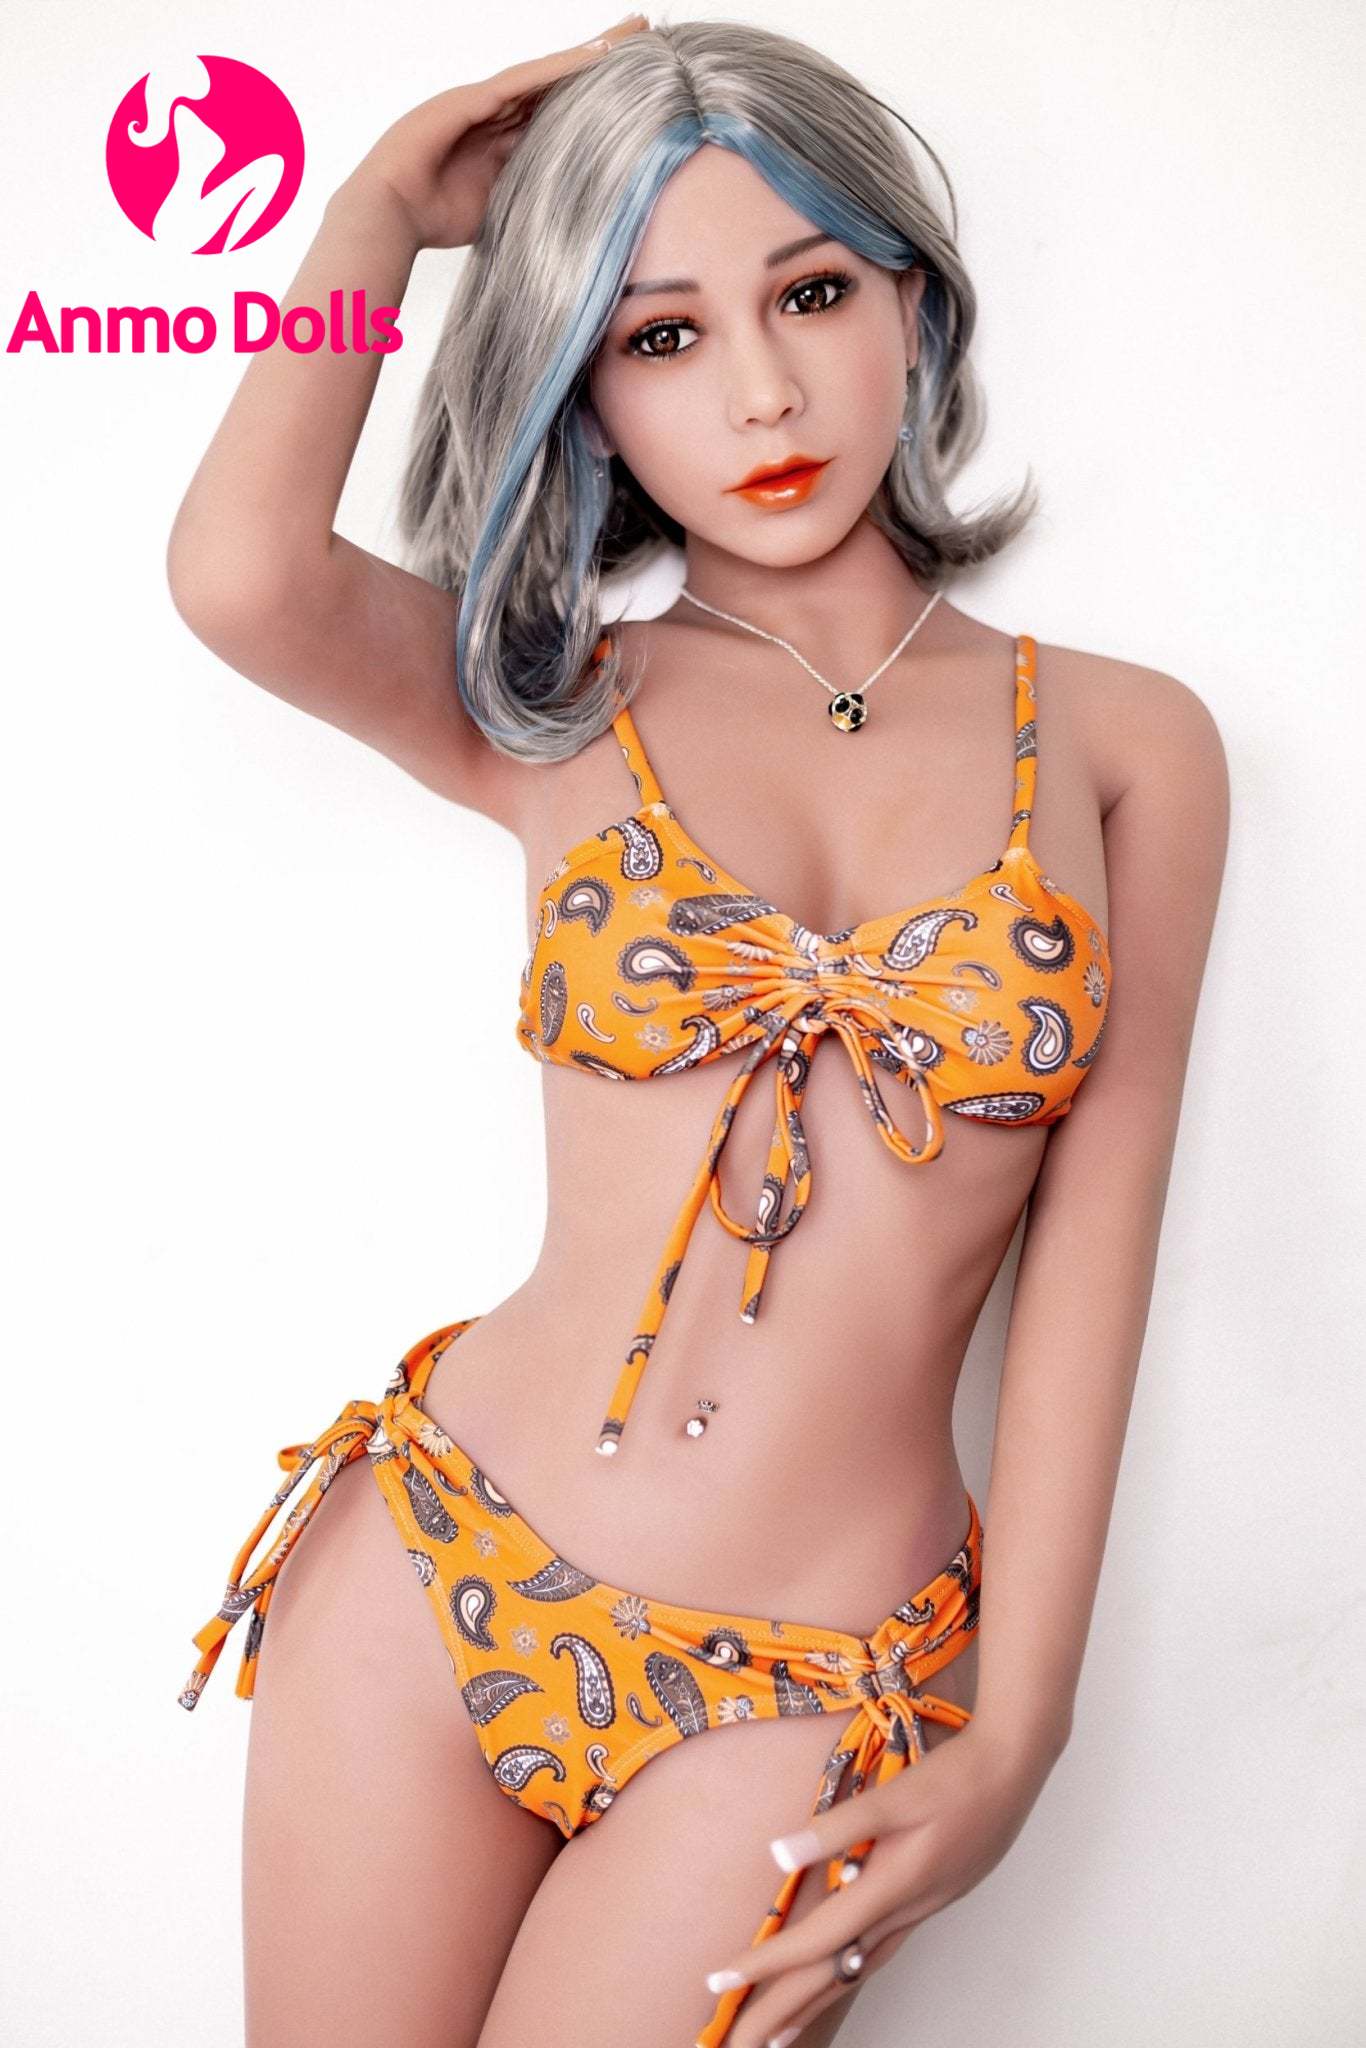 Paolina - Ultra realistic TPE sex doll (4 Sizes) by Anmodolls